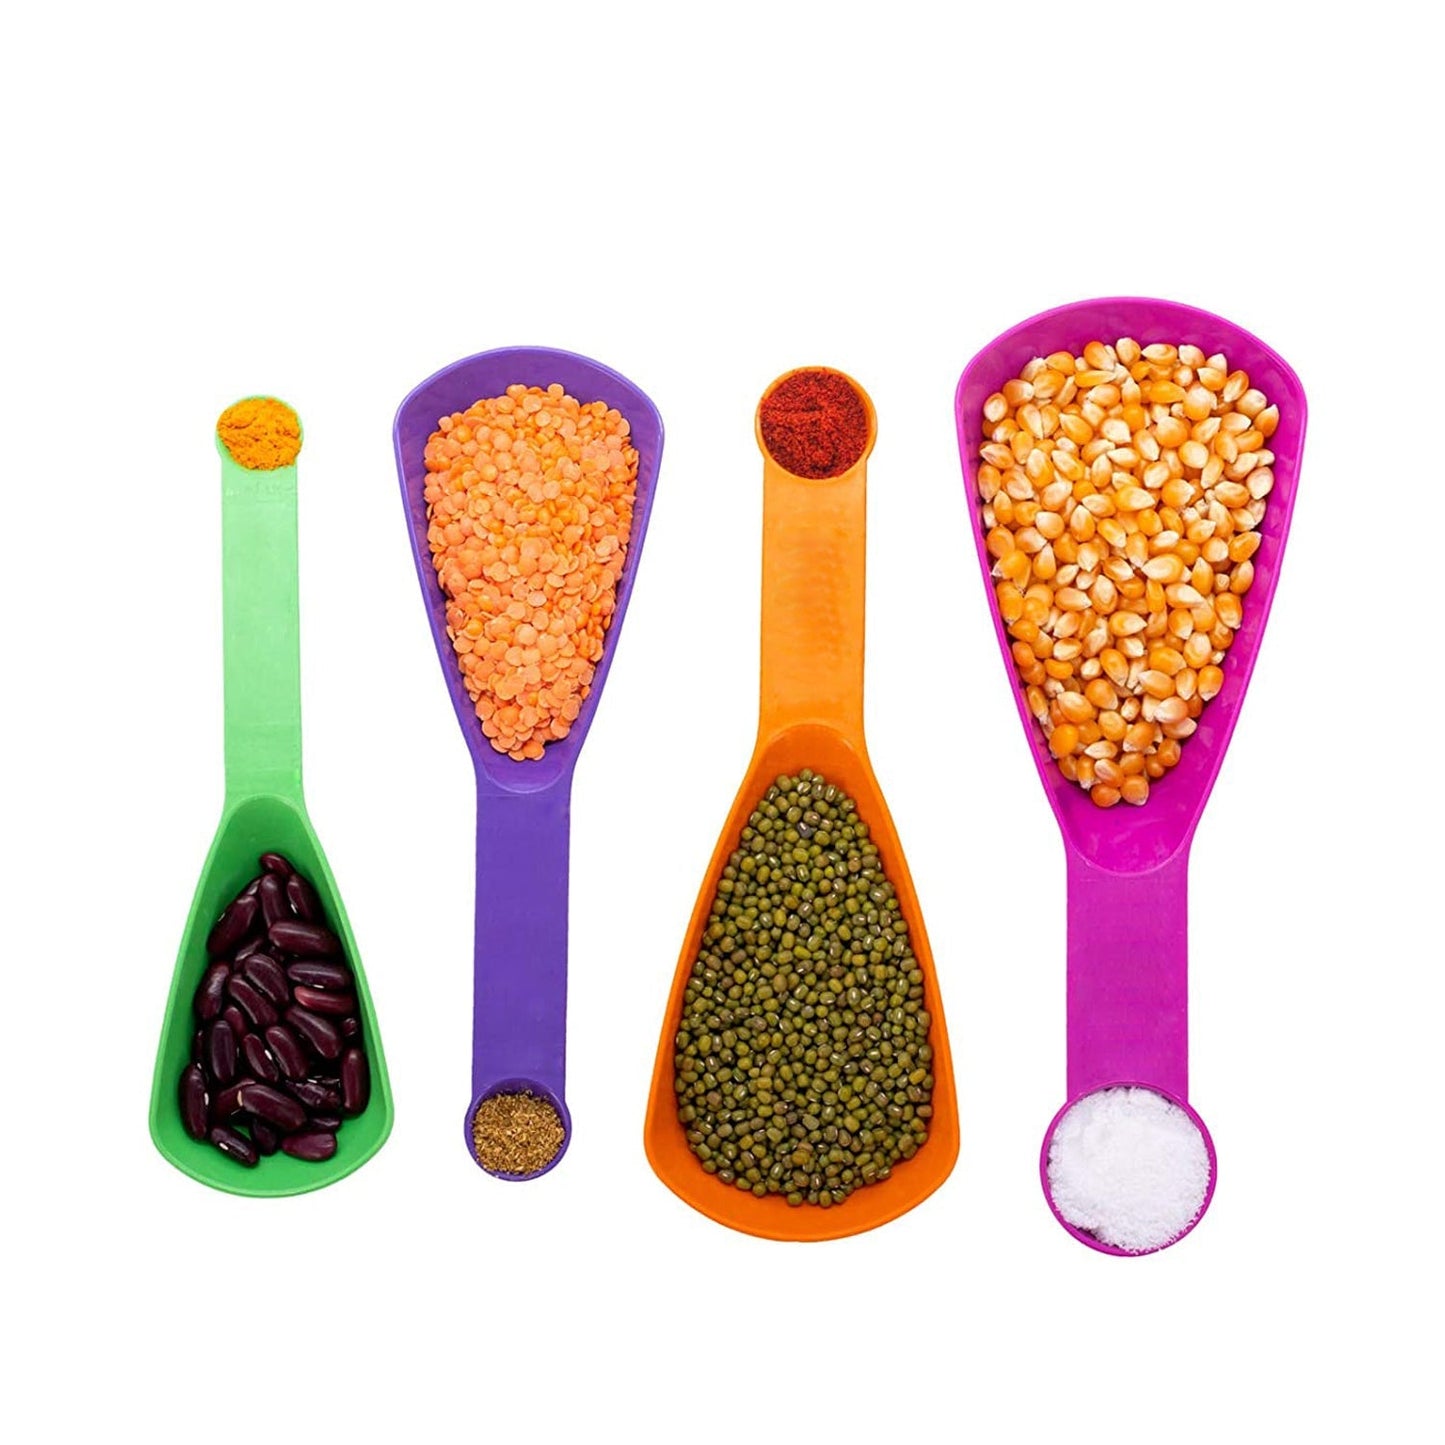 DOUBLE SIDE MEASURING CUPS AND SPOONS 4PCS